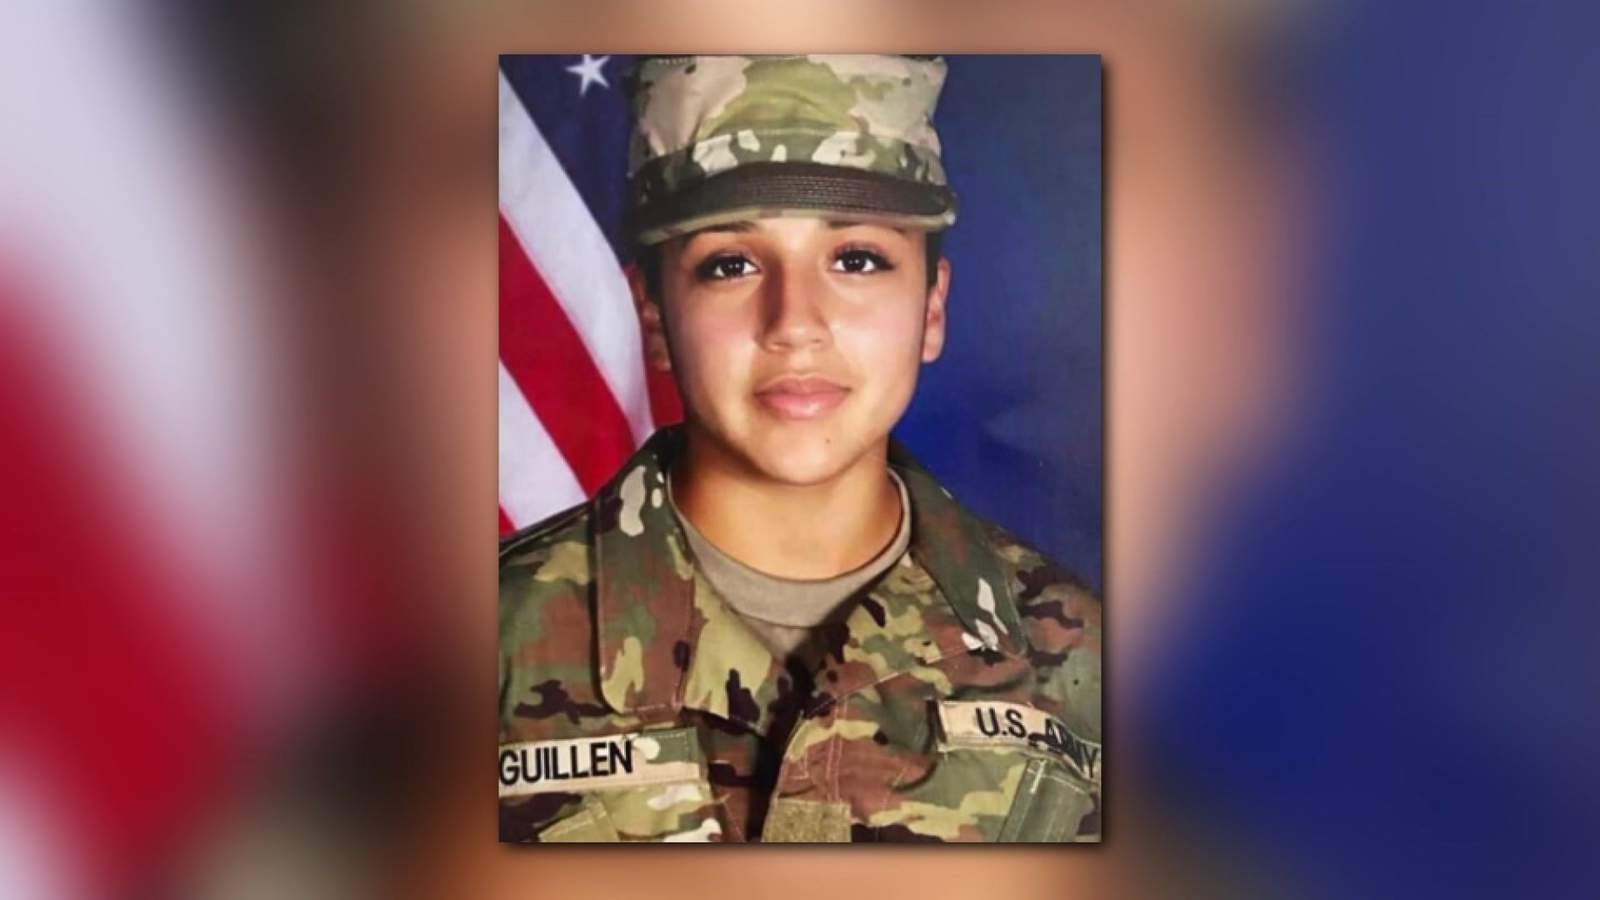 Remains of missing Fort Hood soldier Vanessa Guilln identified, lawyer confirms